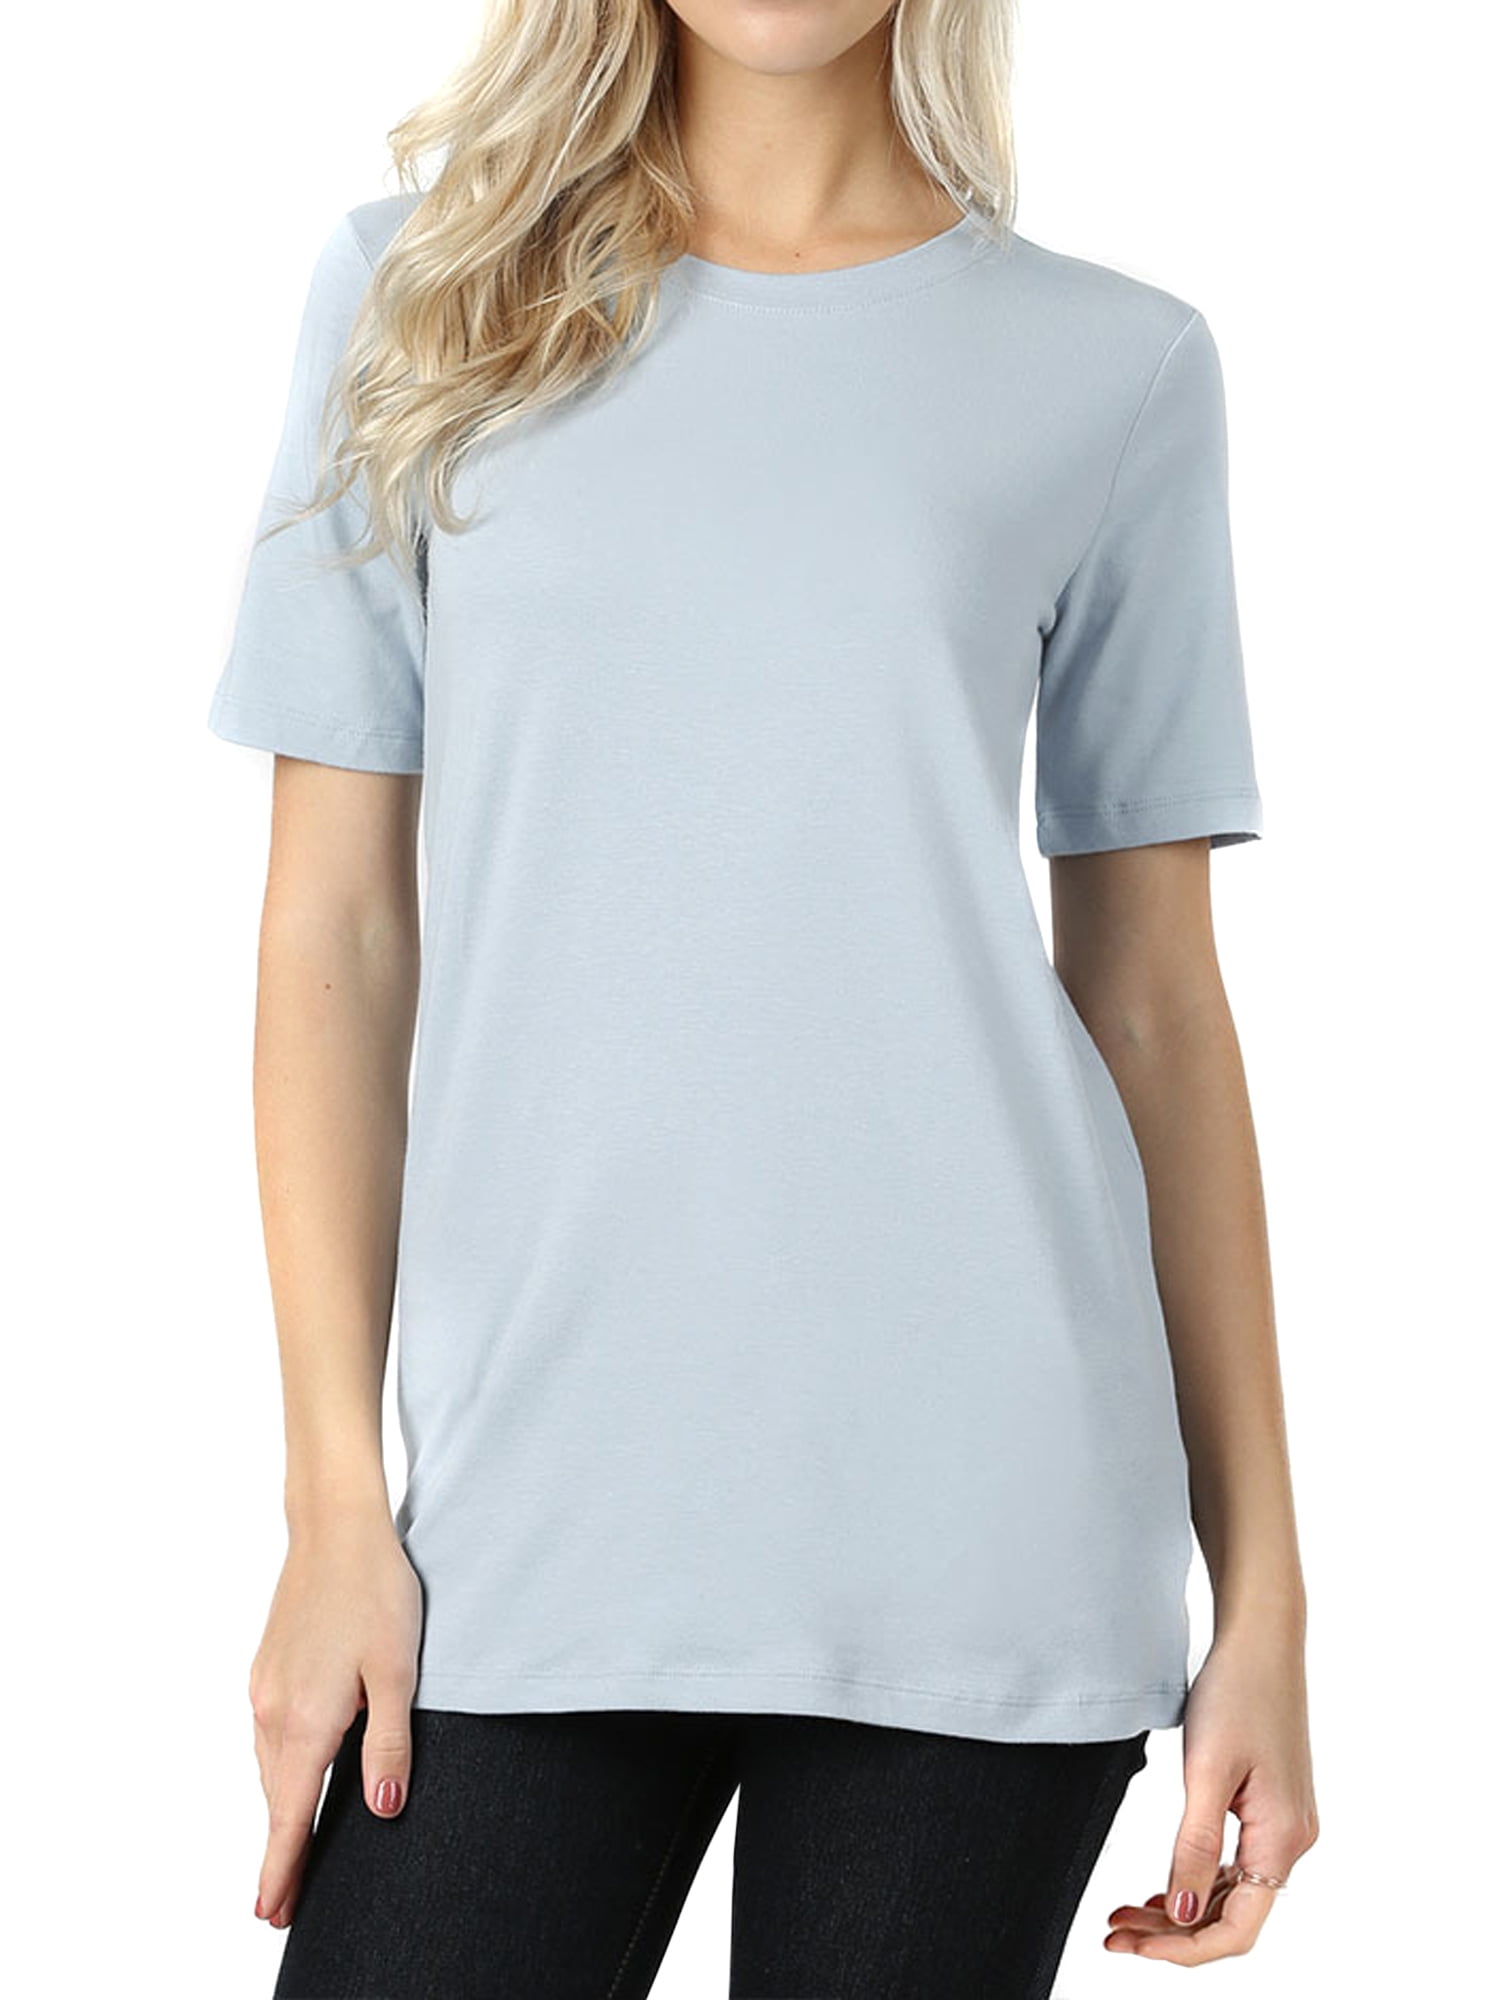 Women's Cotton Crew Neck Short Sleeve Relaxed Fit Basic Tee Shirts ...